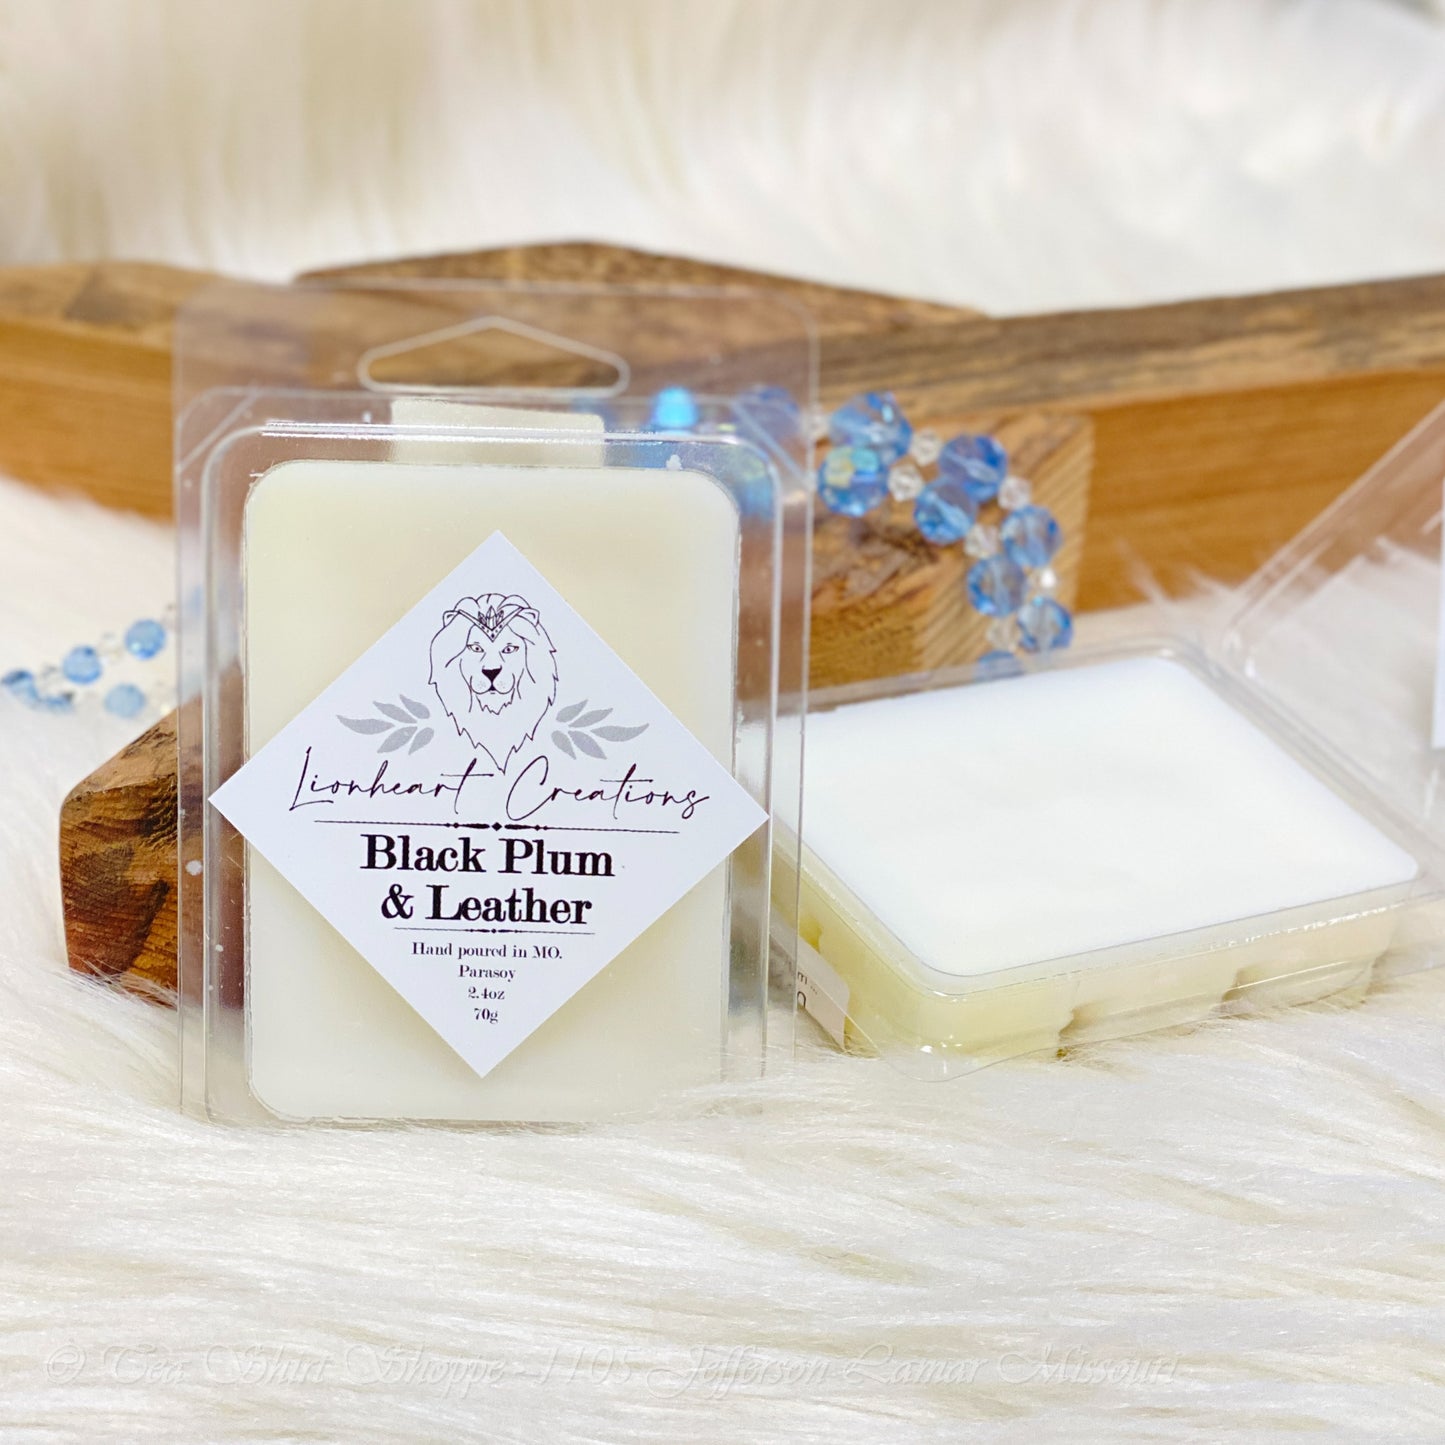 Black Plum & Leather Scented Wax Melt Welcome your home with the sweet, yet sensual scent of Black Plum & Leather Wax Melt! This delightful blend is sure to fill your space with a warm, comforting aroma that will have your guests asking what you have burning.